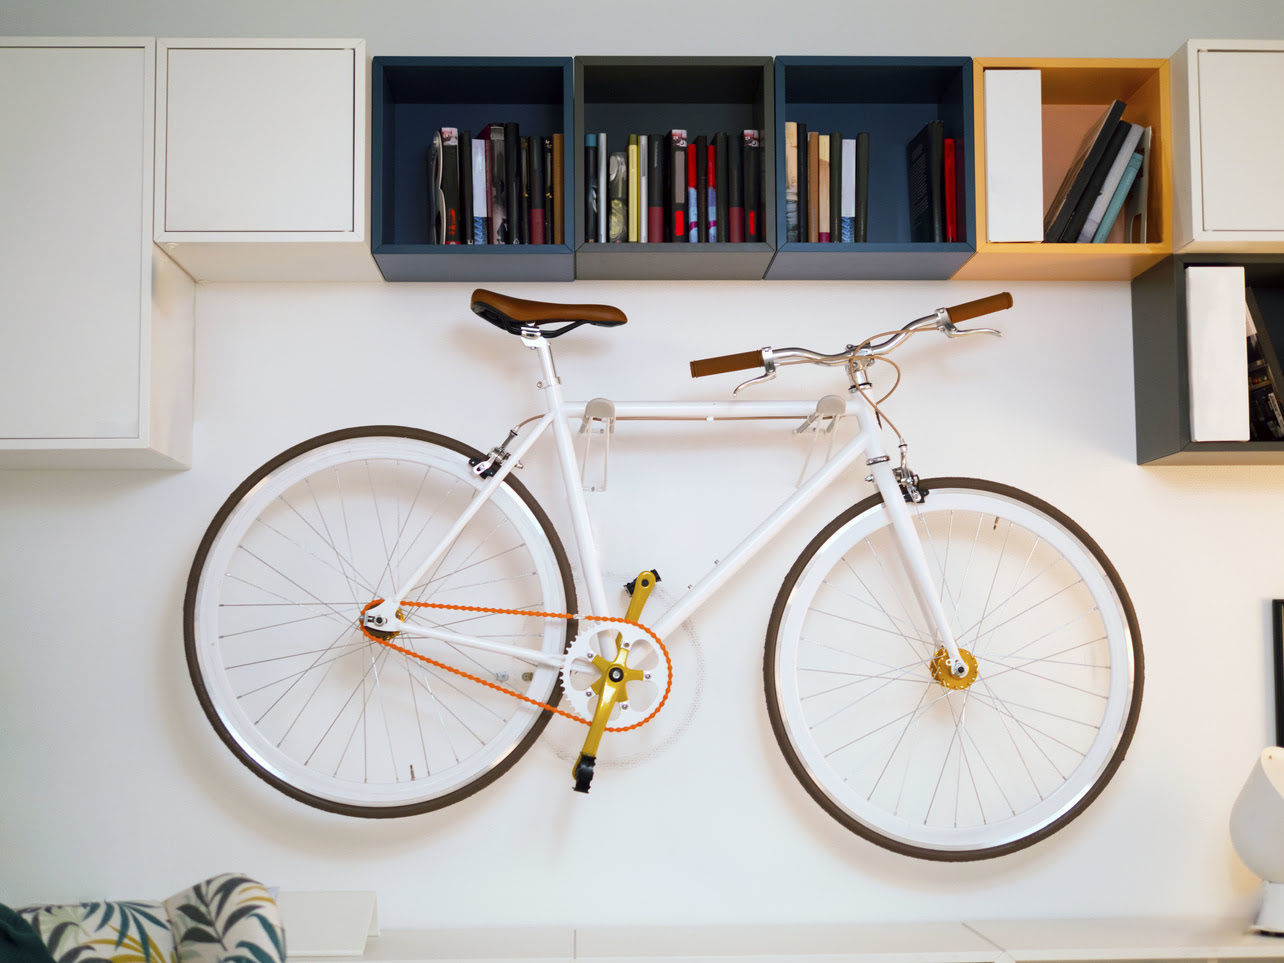 How To Store Your Bike In An Apartment